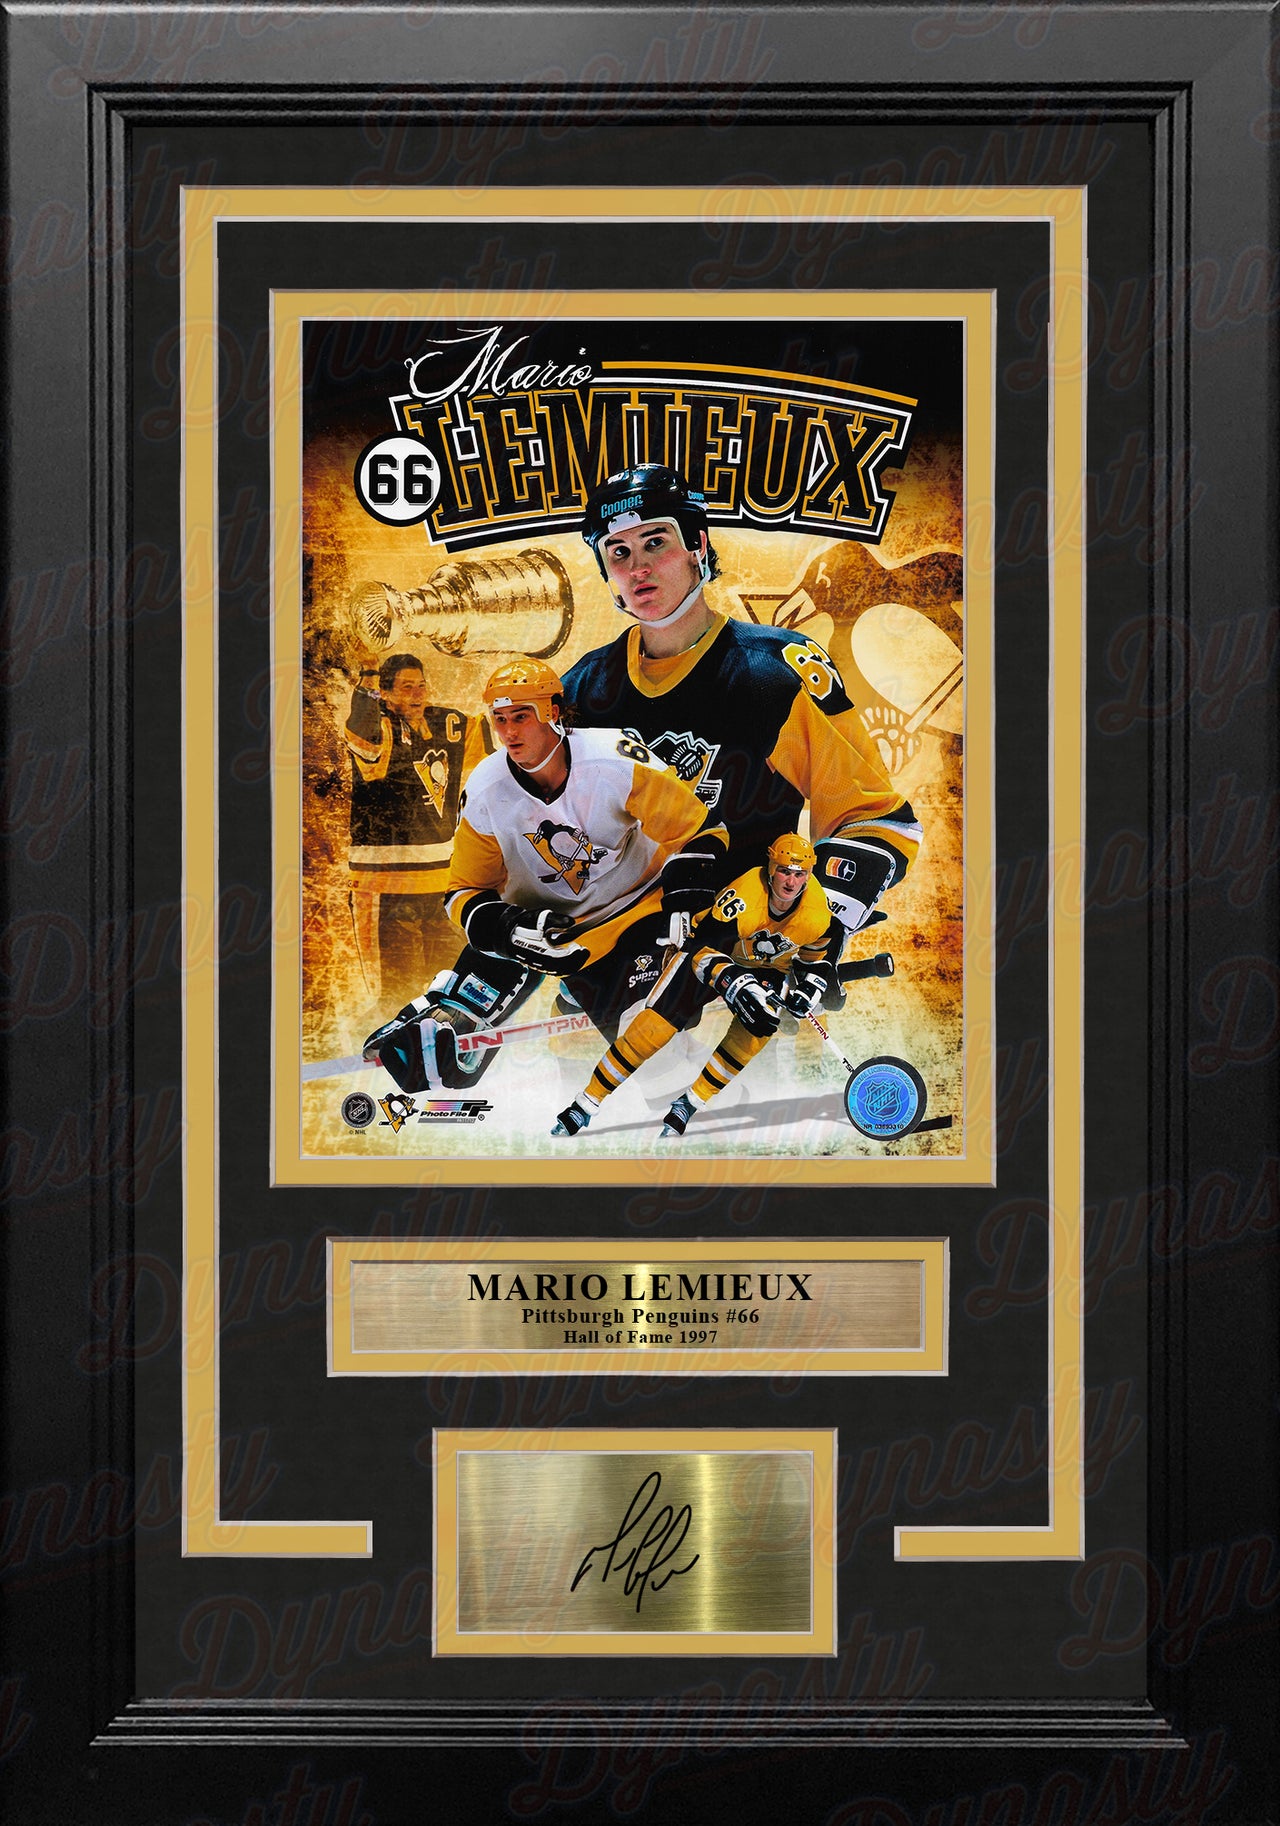 Mario Lemieux Pittsburgh Penguins 8x10 Framed Hockey Collage Photo with Engraved Autograph - Dynasty Sports & Framing 